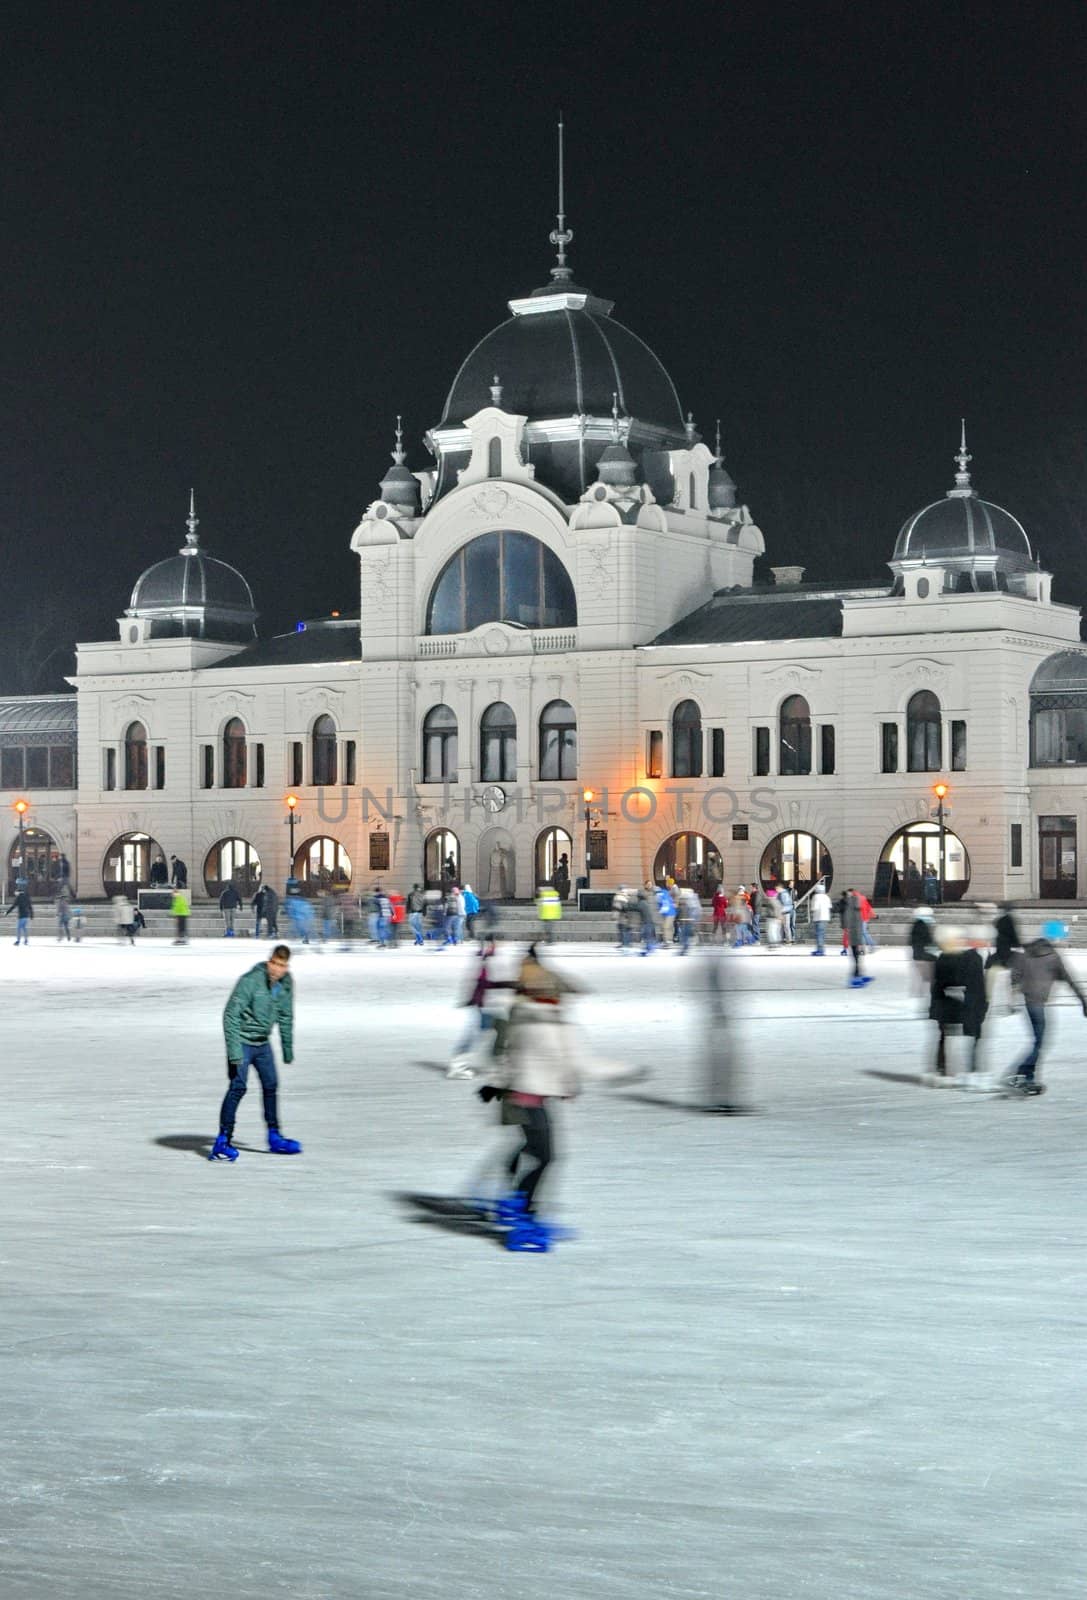 BUDAPEST - DECEMBER 13:Ice skaters in City Park Ice Rink on December 13, 2012 in Budapest, Hungary. Opened in 1870, it is the largest and one of the oldest ice rinks in Europe.